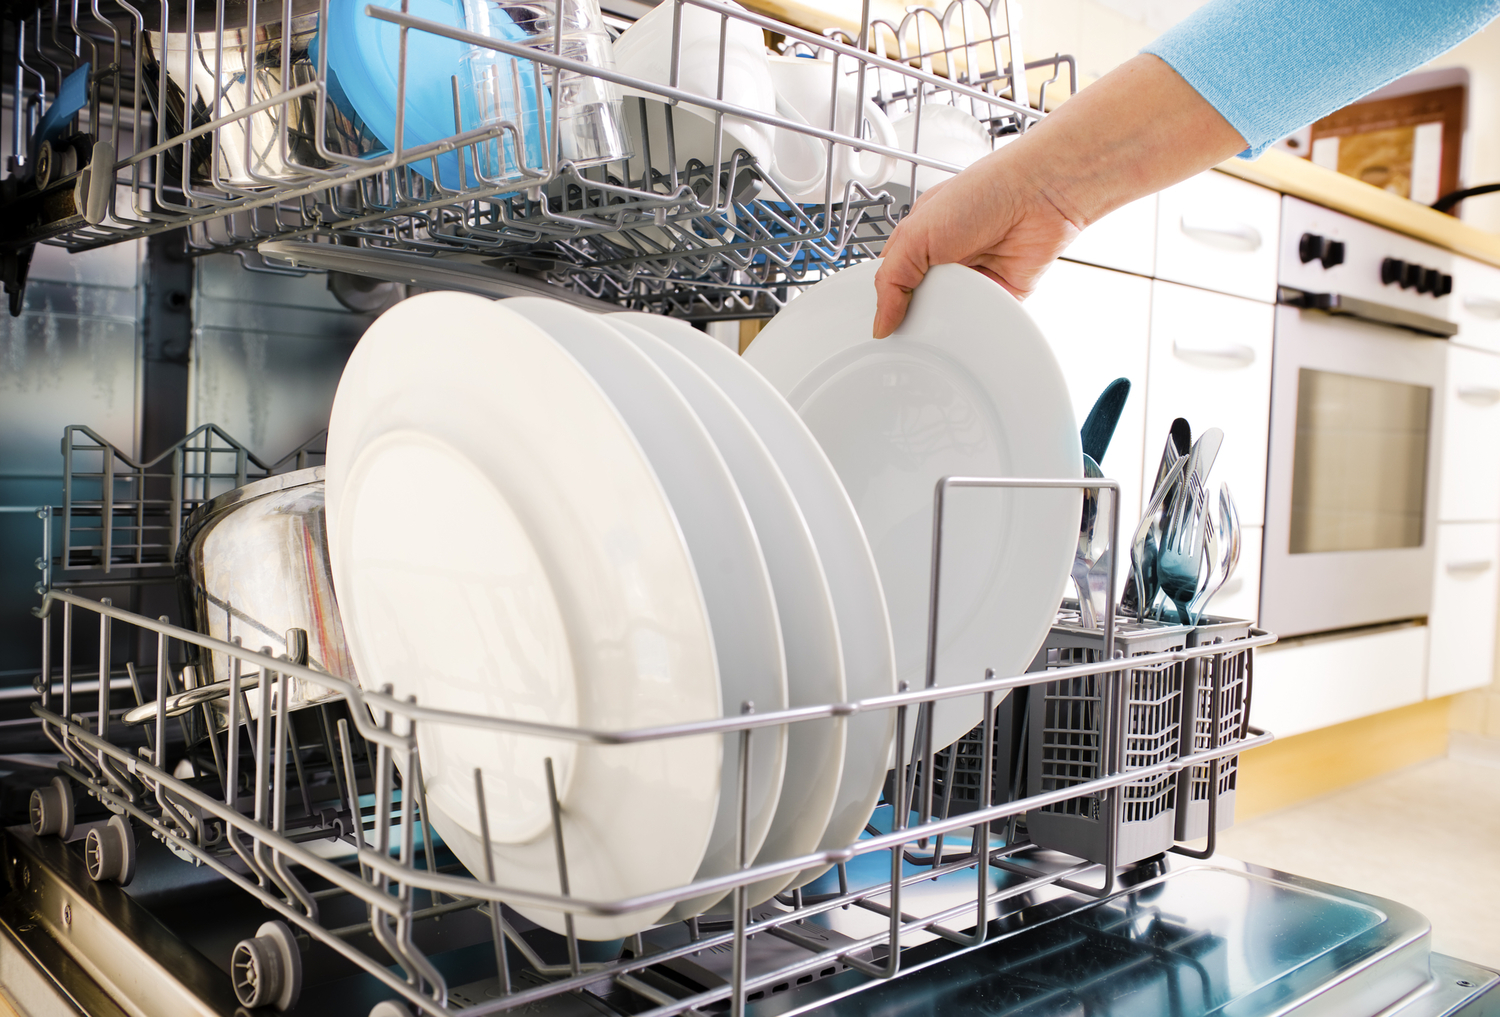 Washing Dishes  The American Cleaning Institute (ACI)